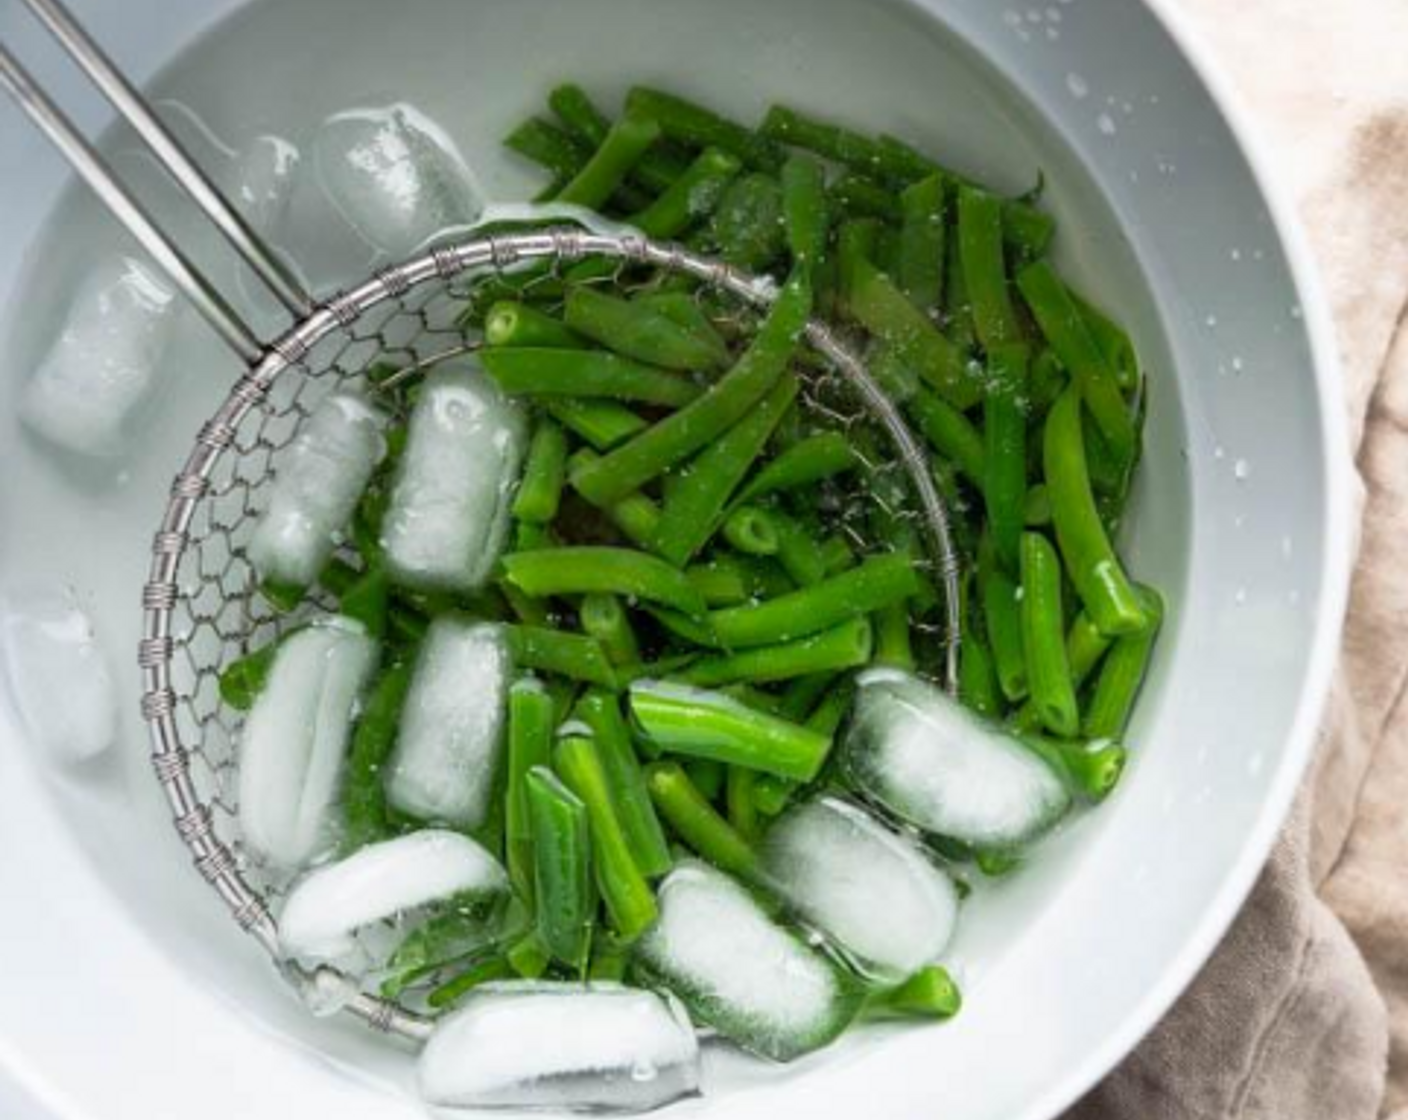 step 6 Use a kitchen spider or slotted spoon to transfer the cooked green beans to the ice bath to stop the cooking and retain the bright green color.